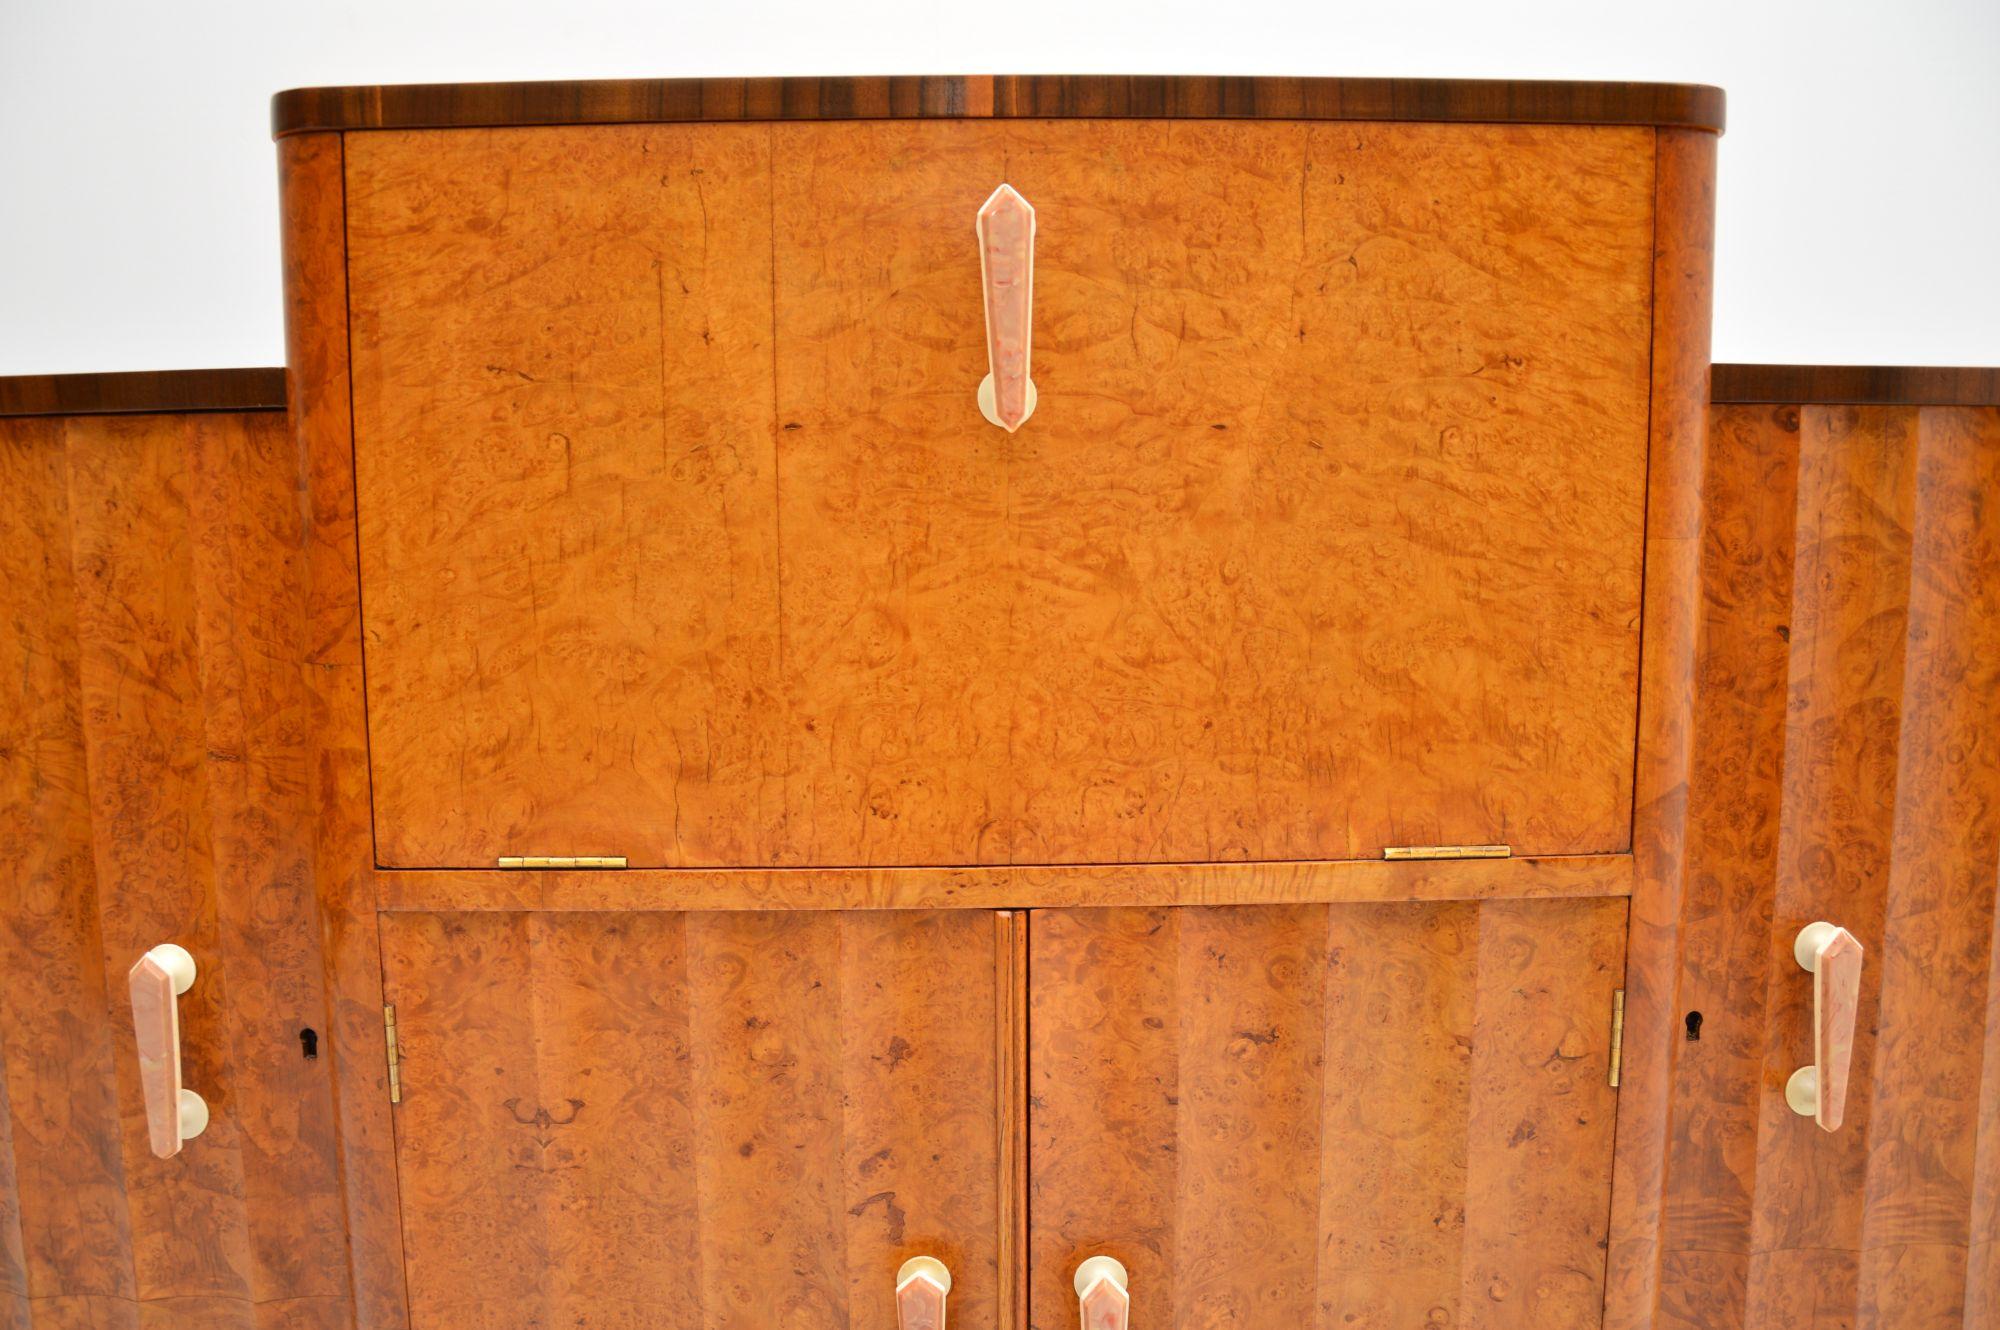 Early 20th Century Art Deco Burr Walnut Cocktail Cabinet / Sideboard by Epstein